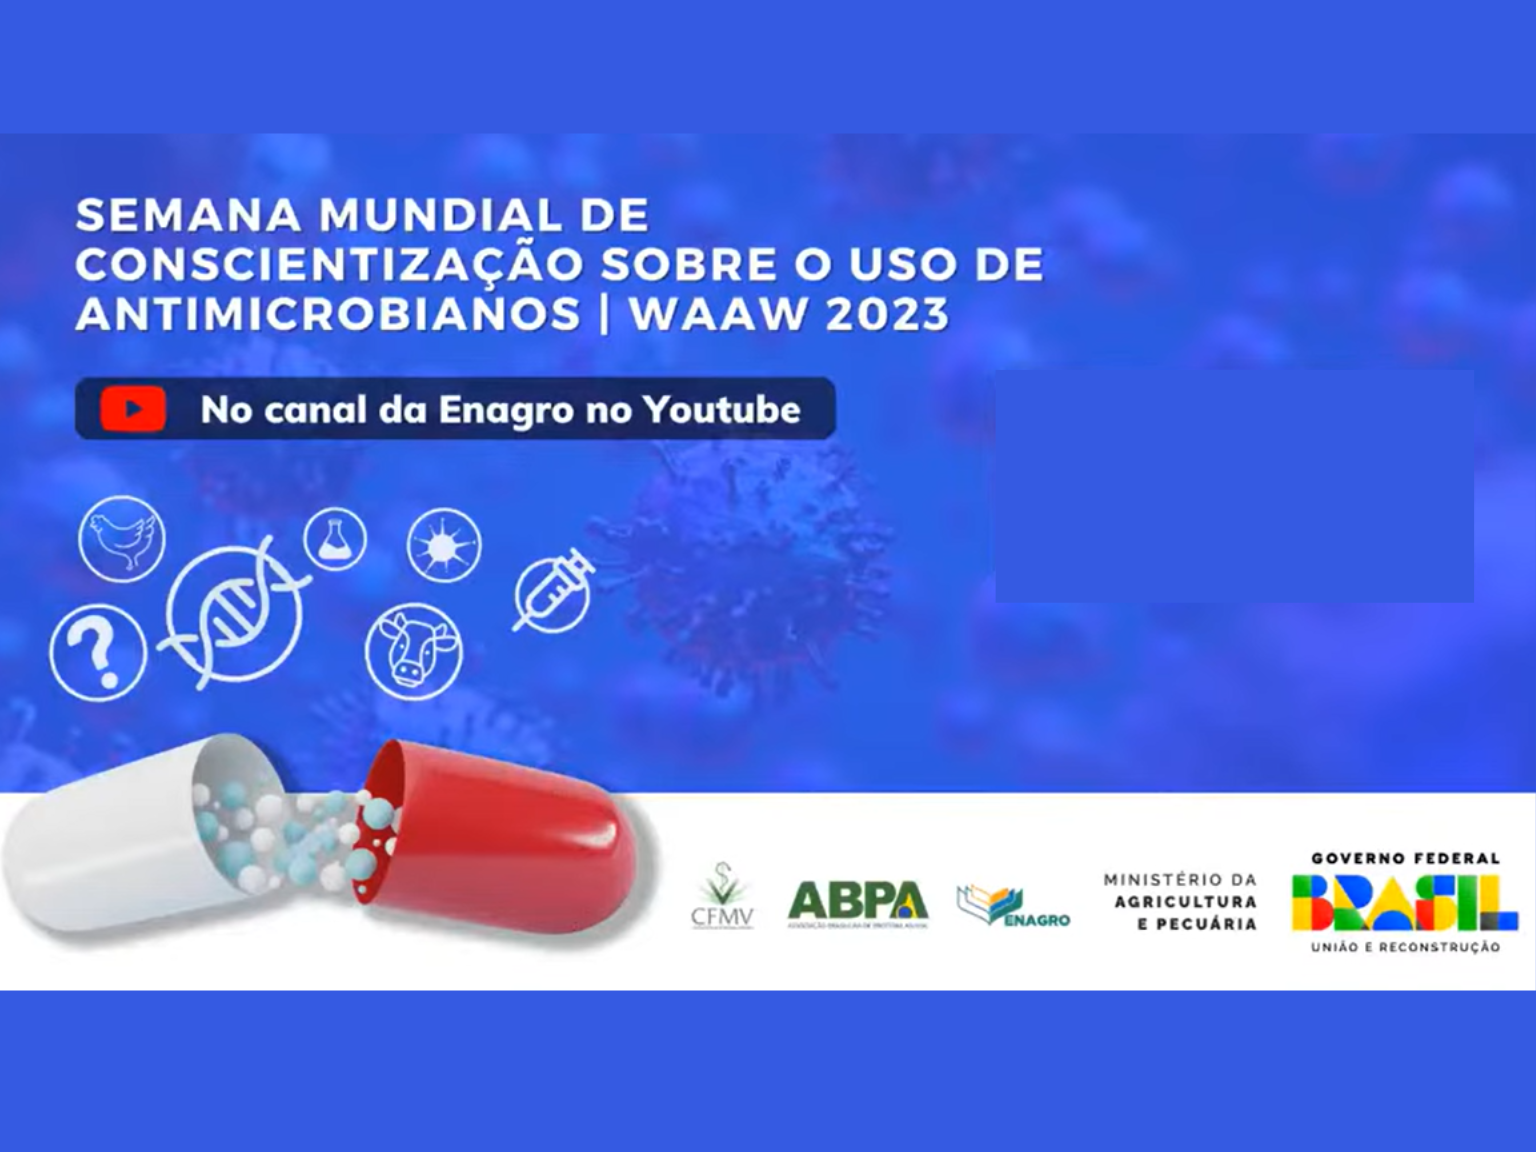 Against antimicrobial resistance, Brazil leads awareness and monitoring actions